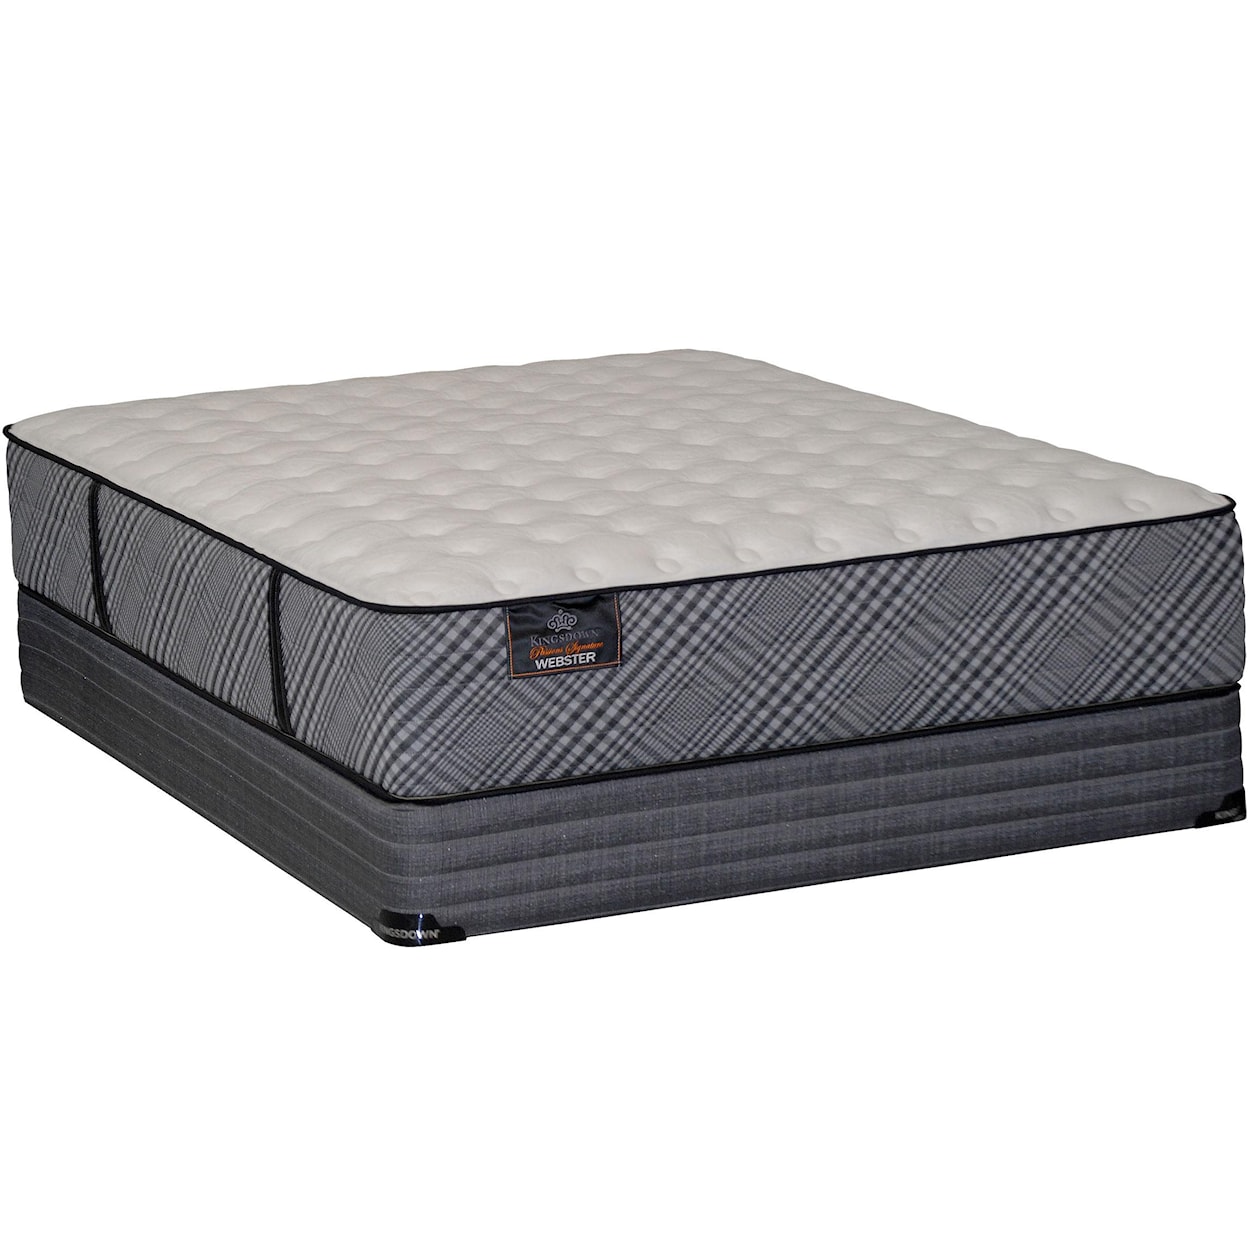 Kingsdown Passions Webster Cal King Firm Mattress